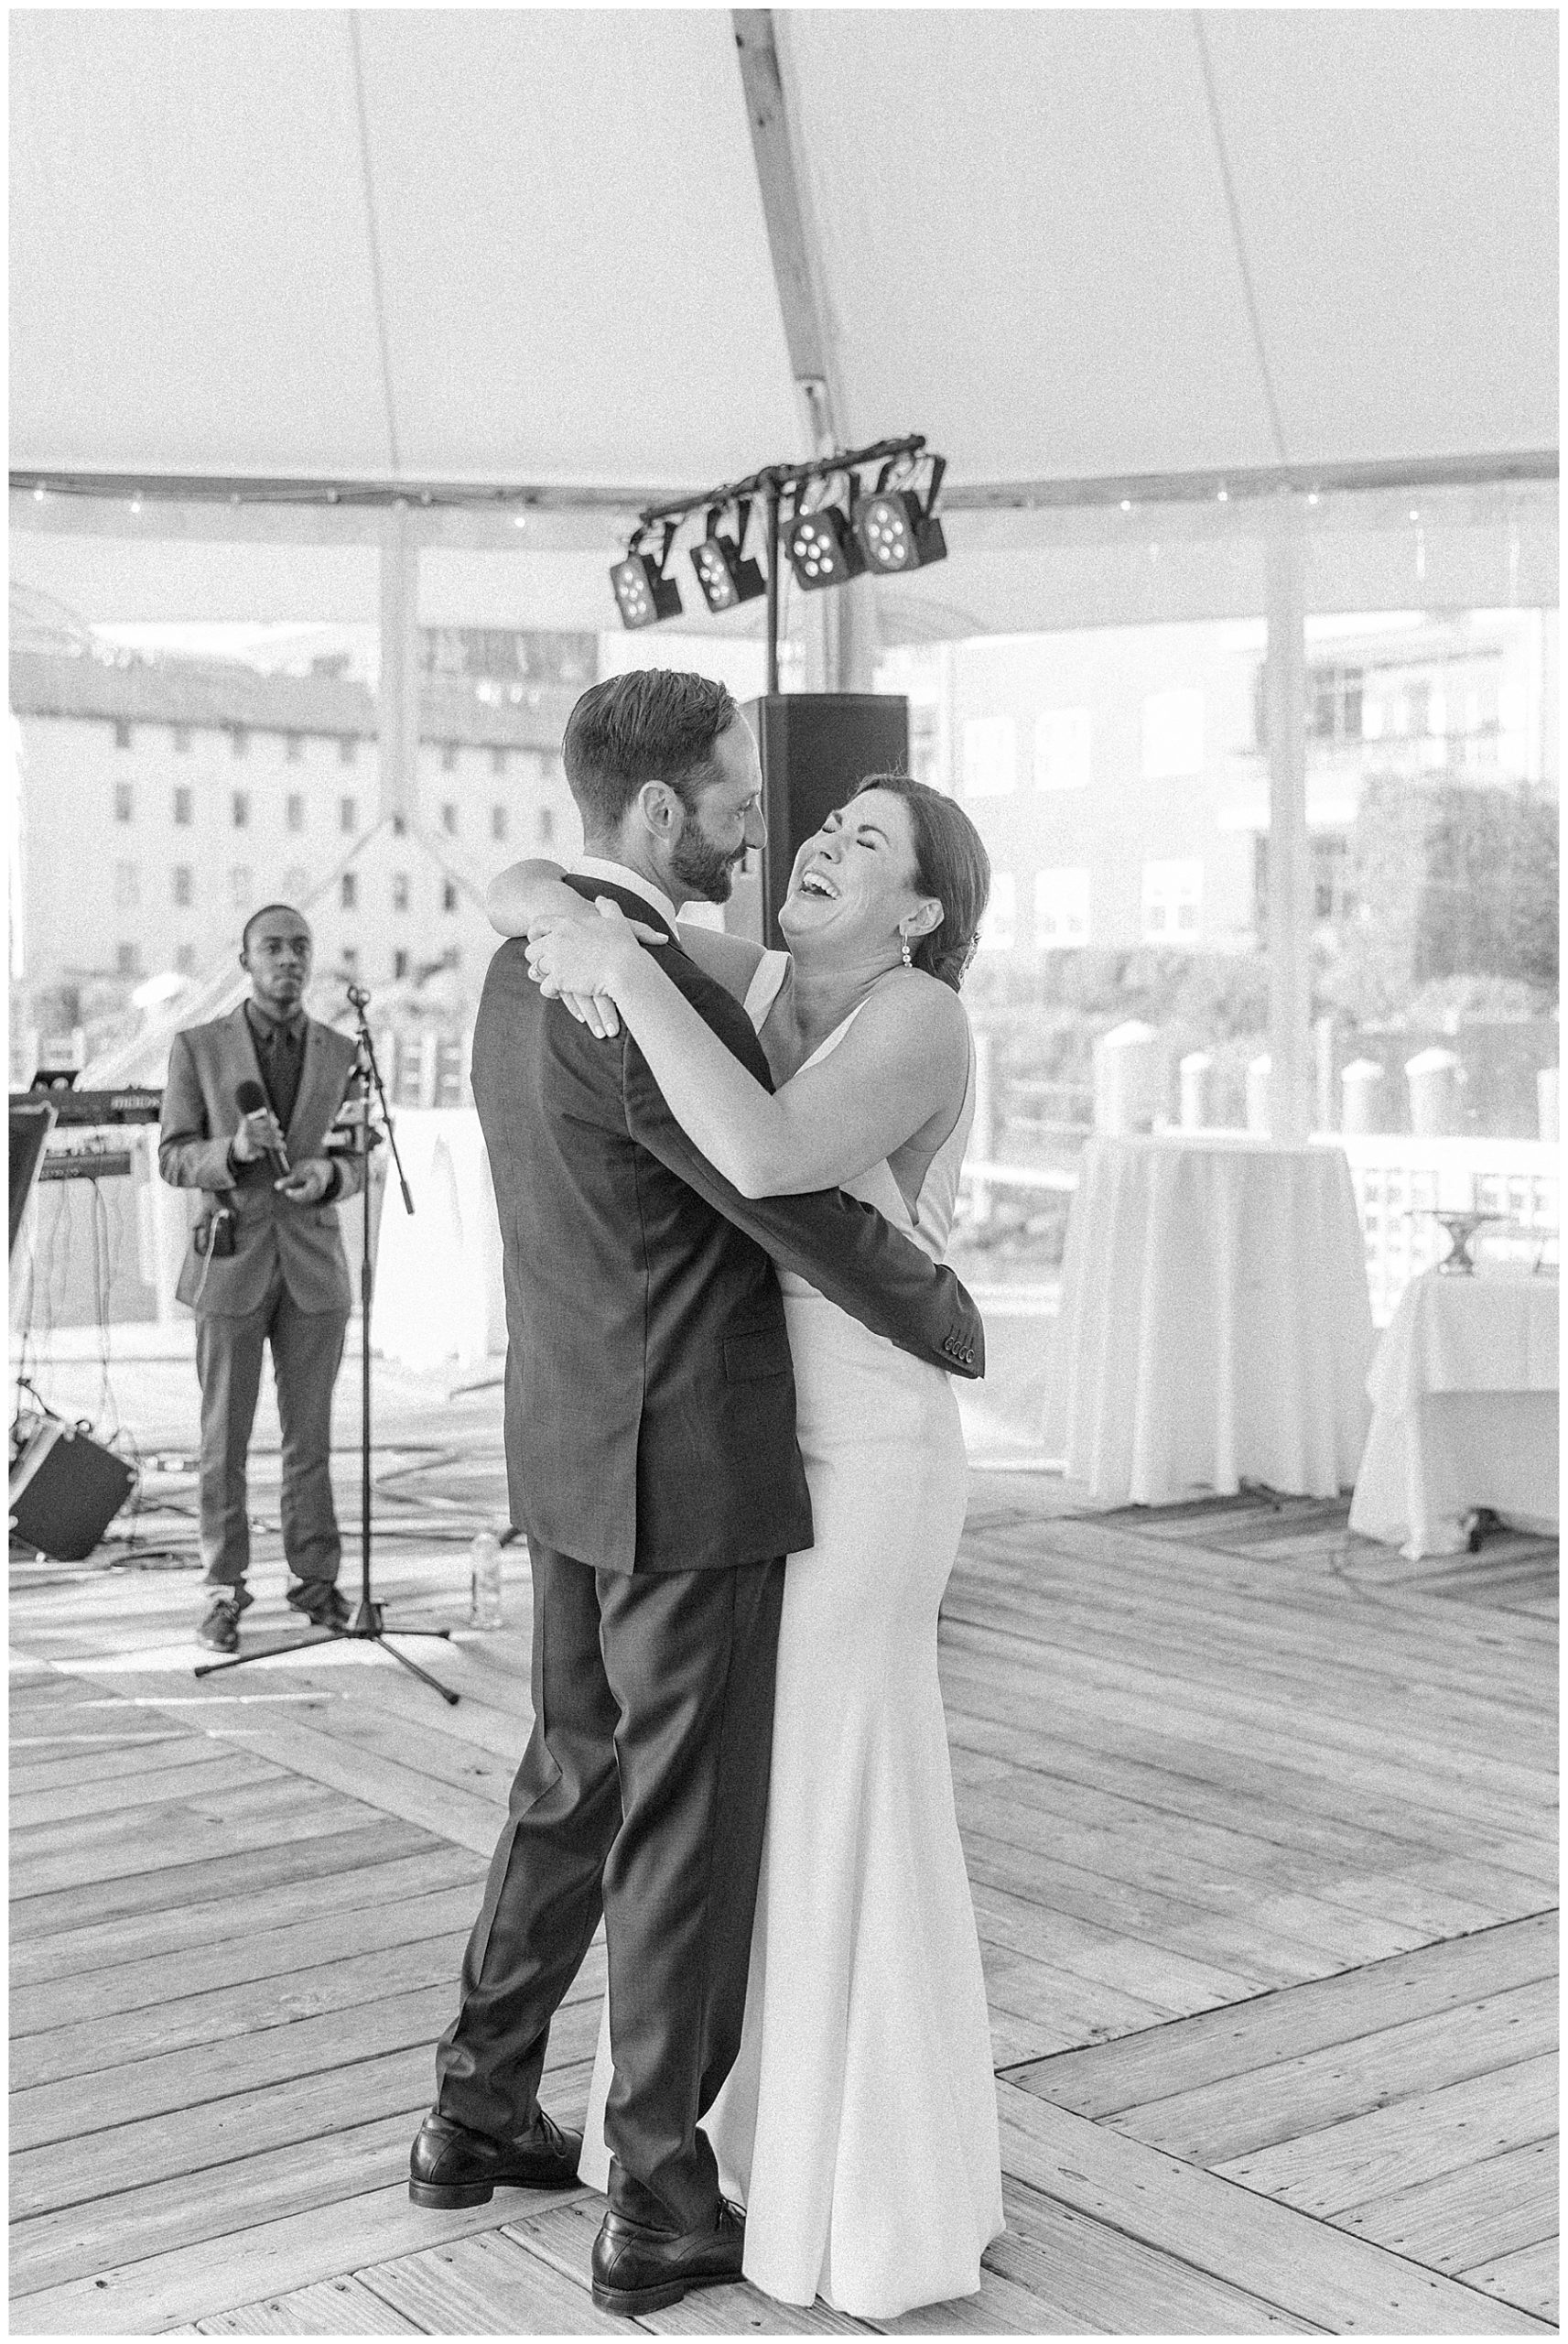 Husband + Wife share first dance at RI wedding reception by Stephanie Berenson Photography